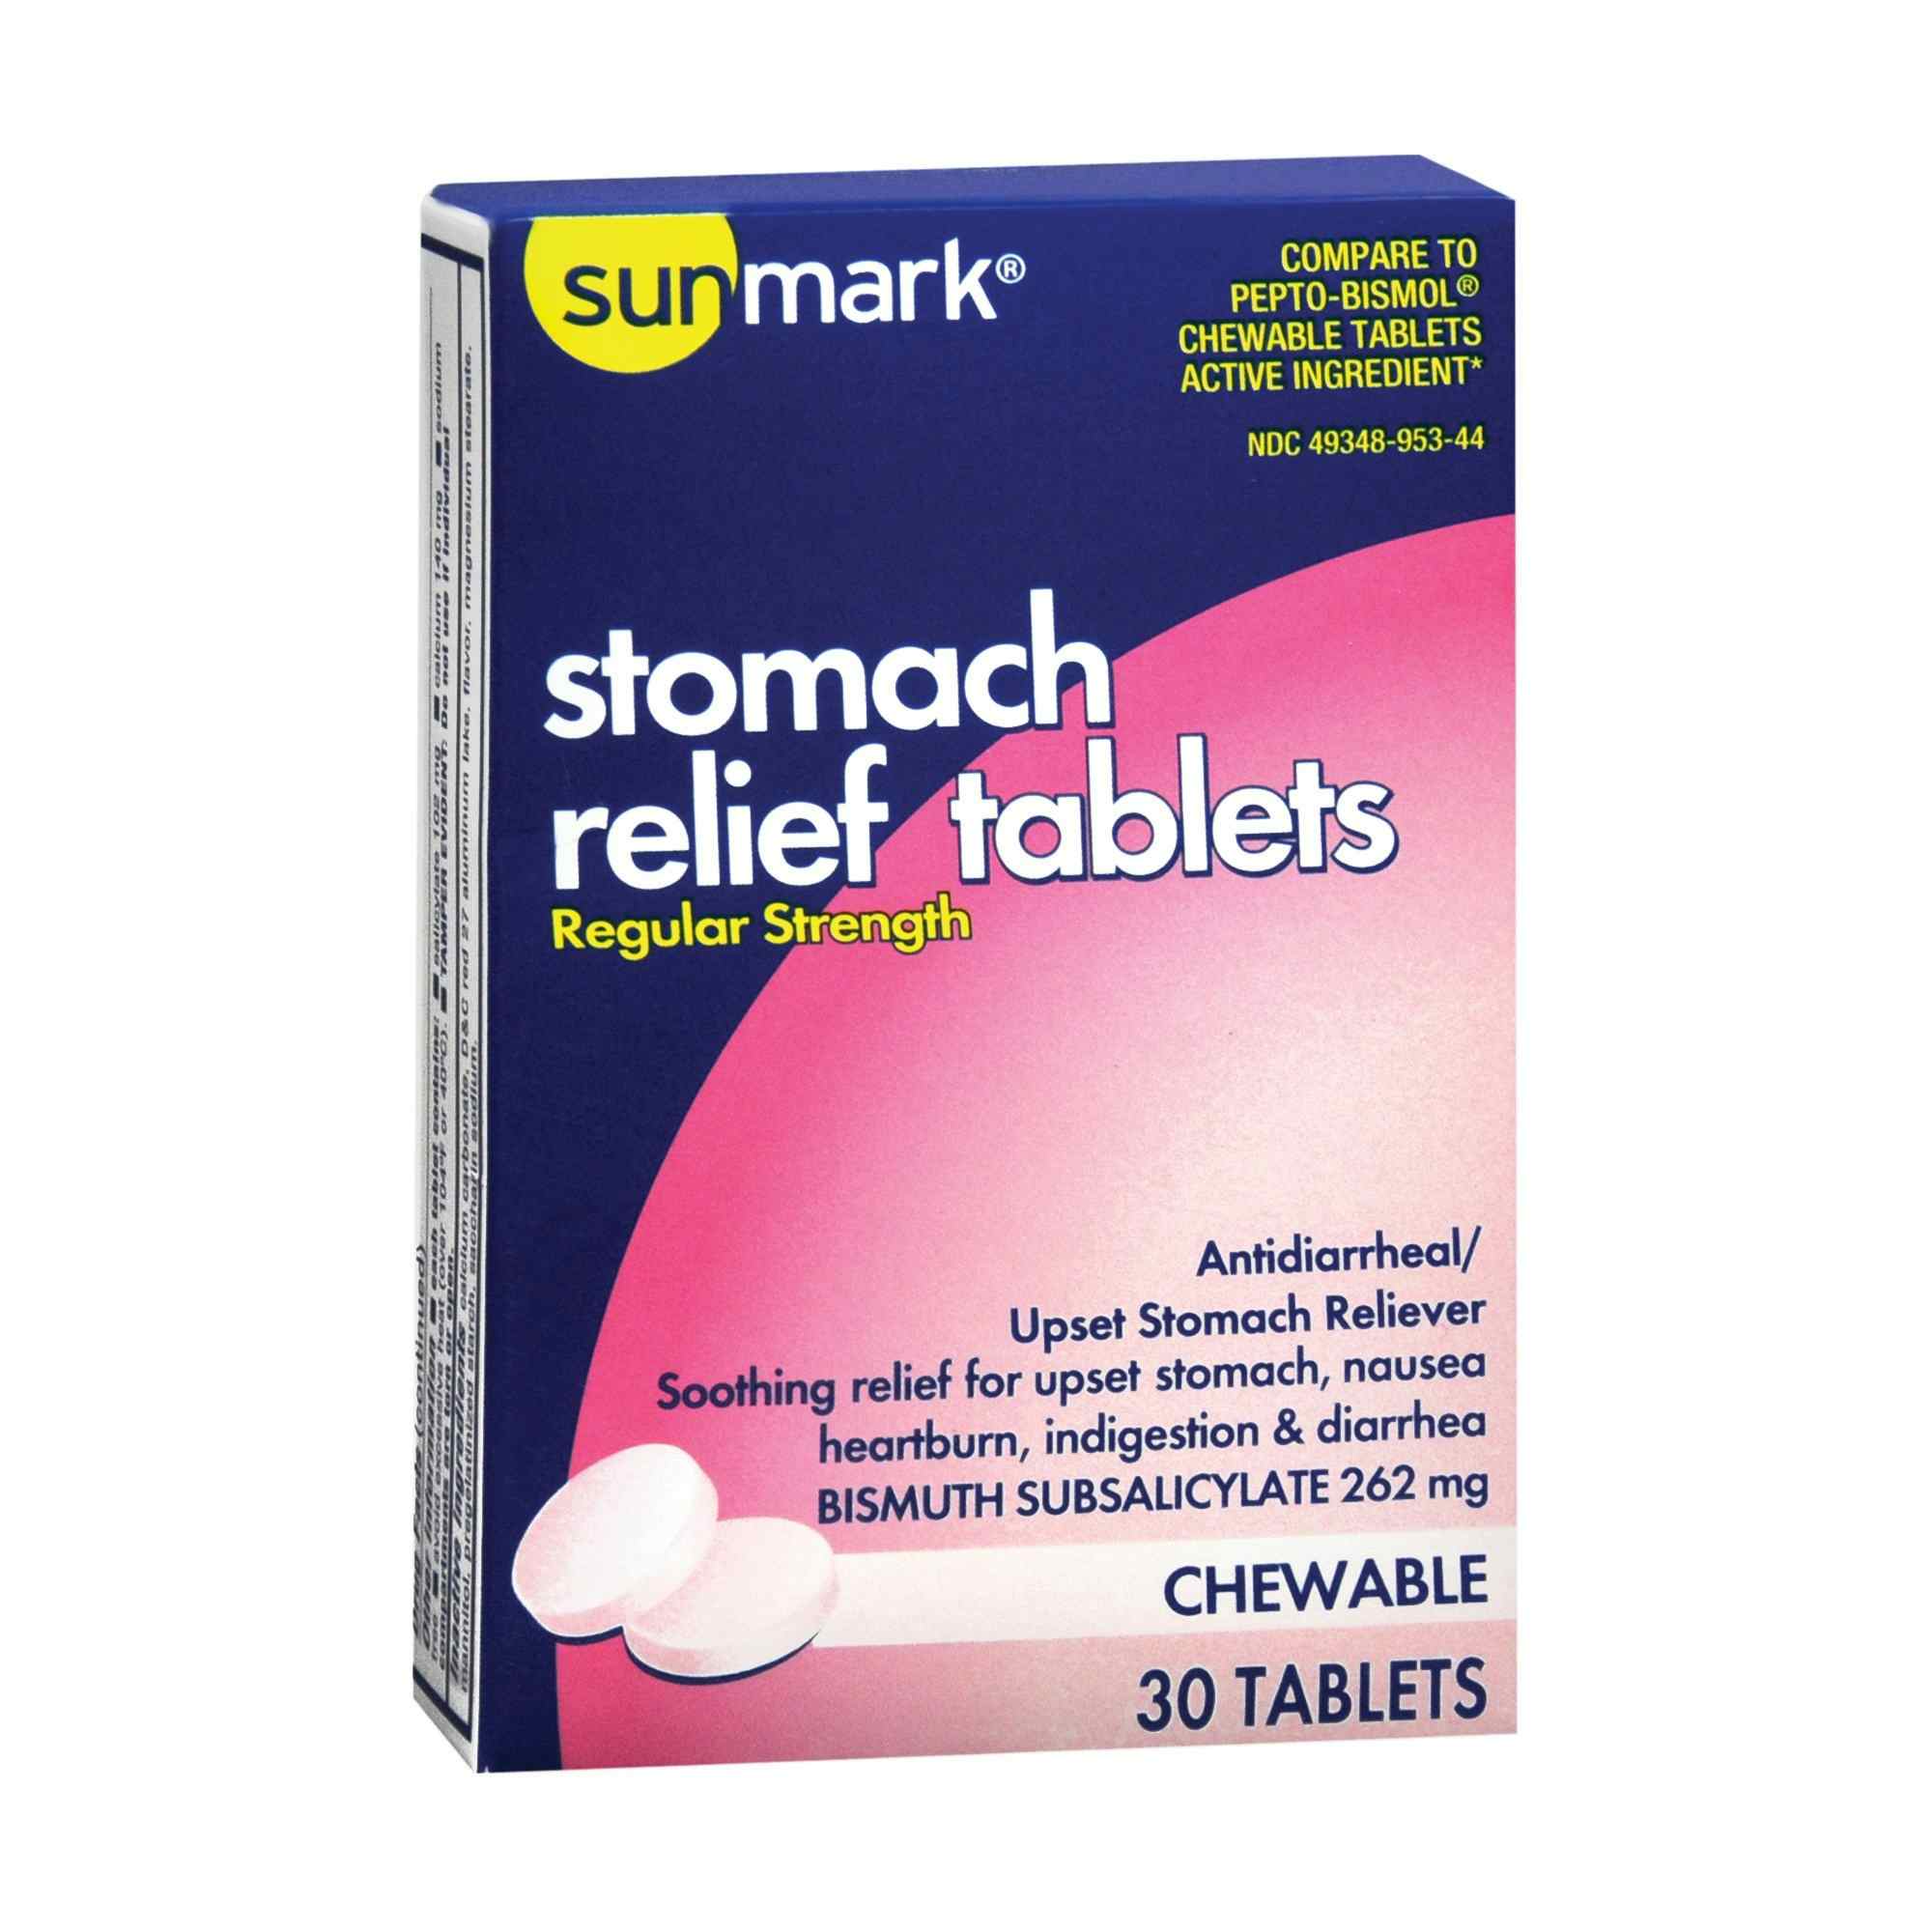 sunmark Regular Strength Stomach Relief Tablets, 262 mg, 30 Tablets, 49348095344, Box of 30